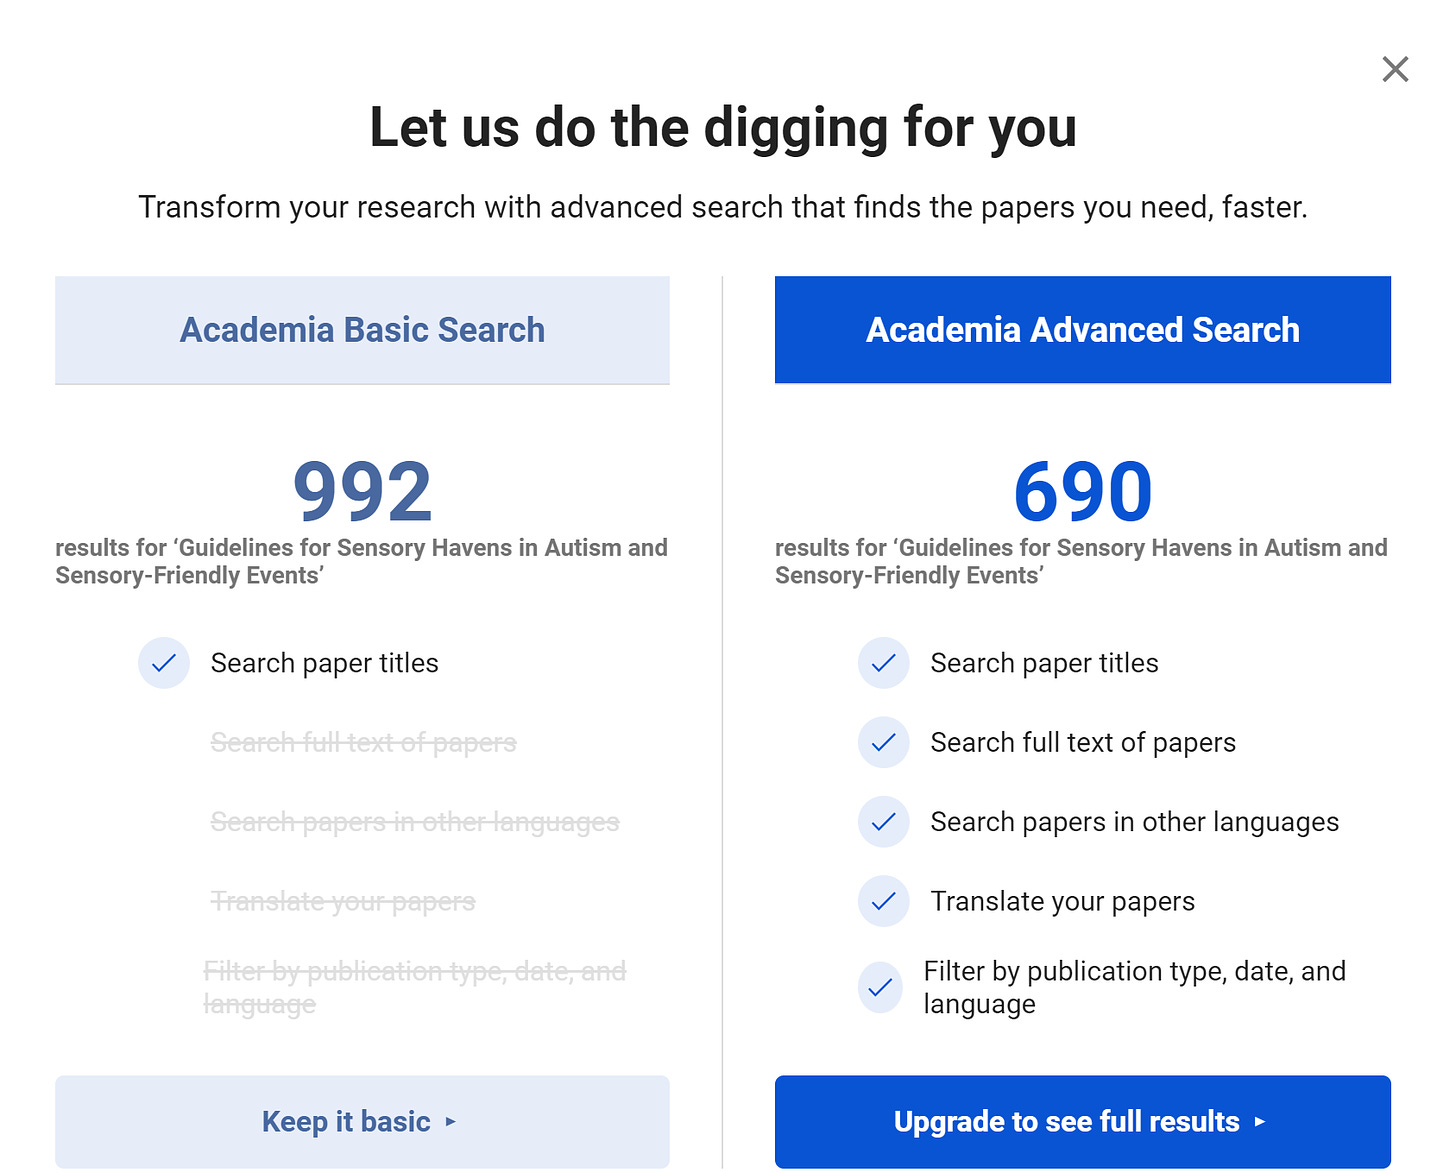 Screenshot of a webpage on academia.edu. The title says "Let us do the digging for you" and presents you with information about free Academia Basic Search versus a paid version. The free version only lets you search paper titles, but it actually comes up with more results than the paid version.